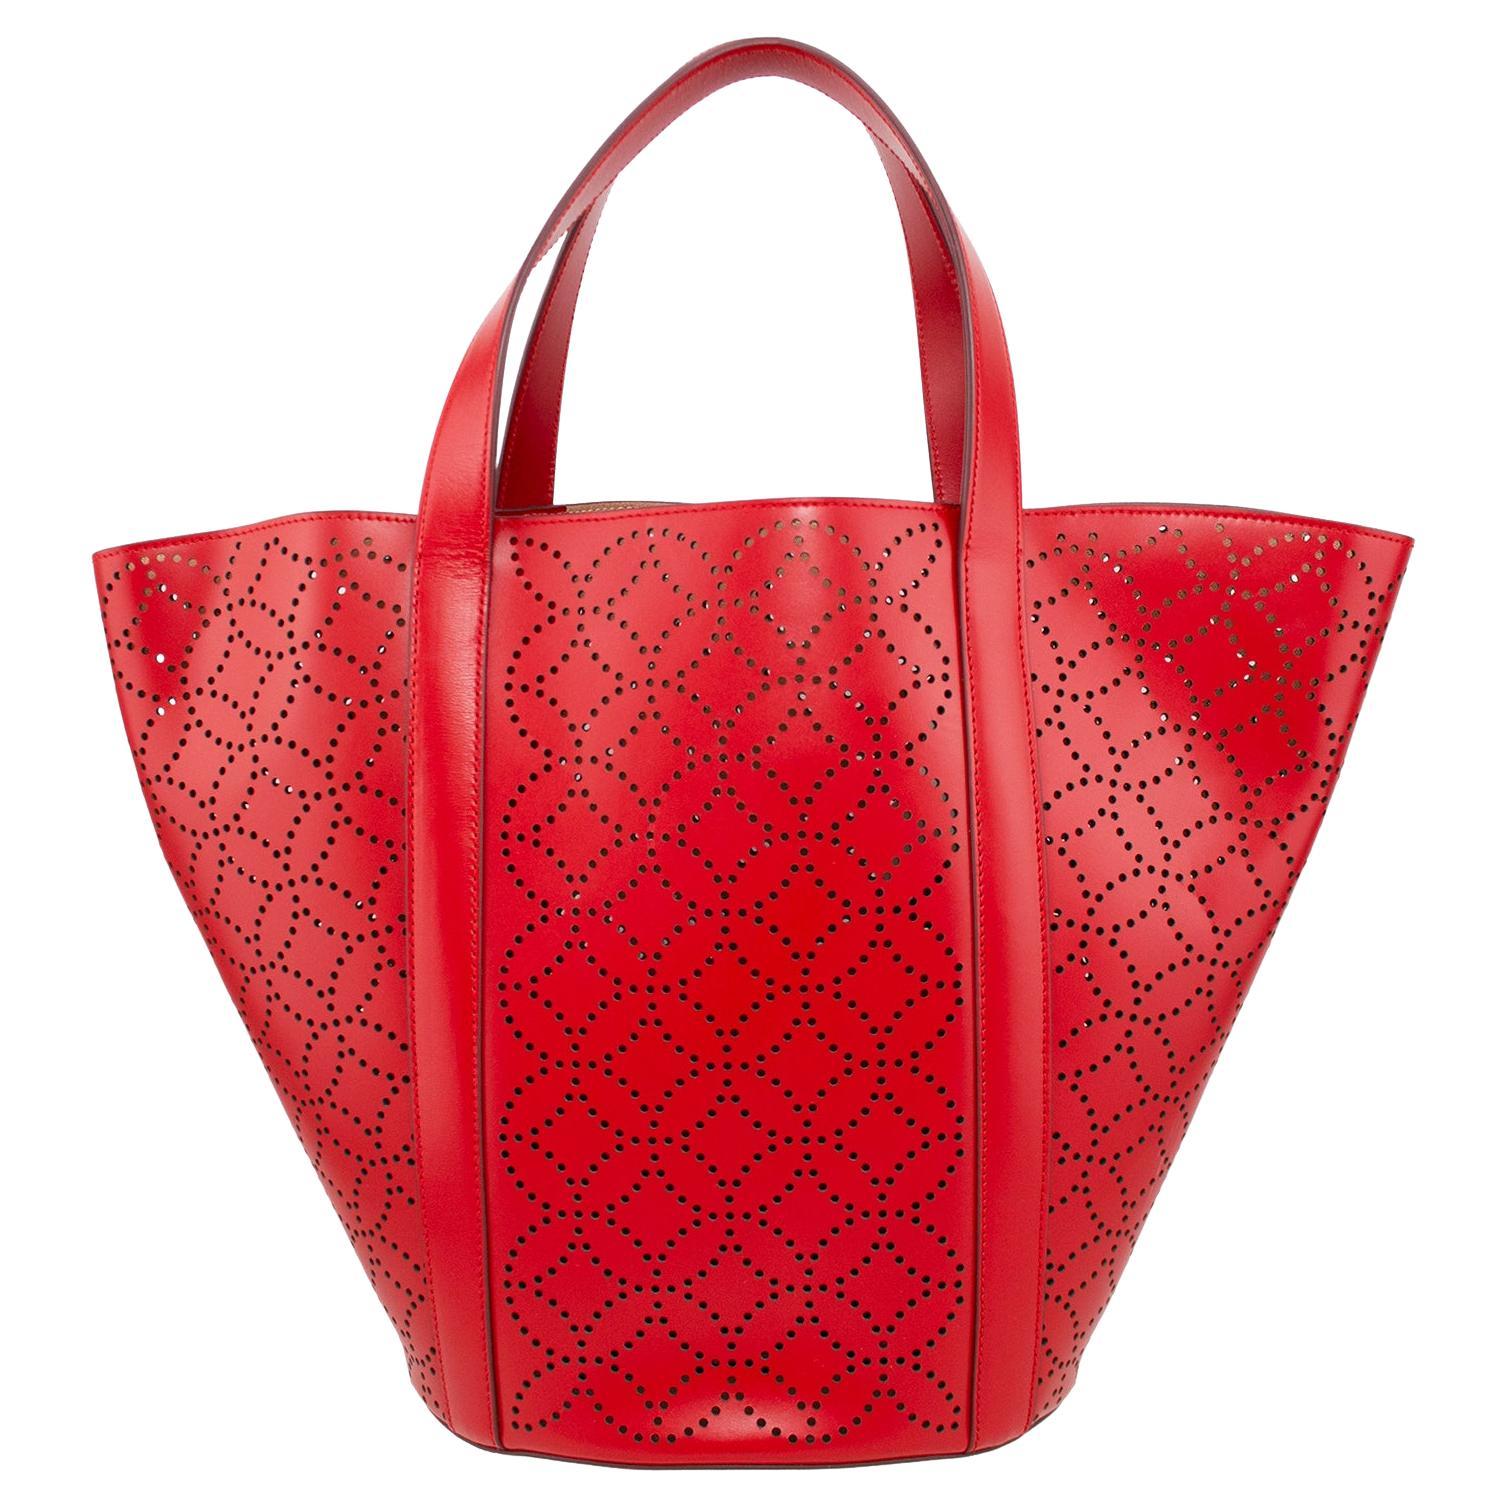 2000s Alaia Red Laser Cut Leather Bag